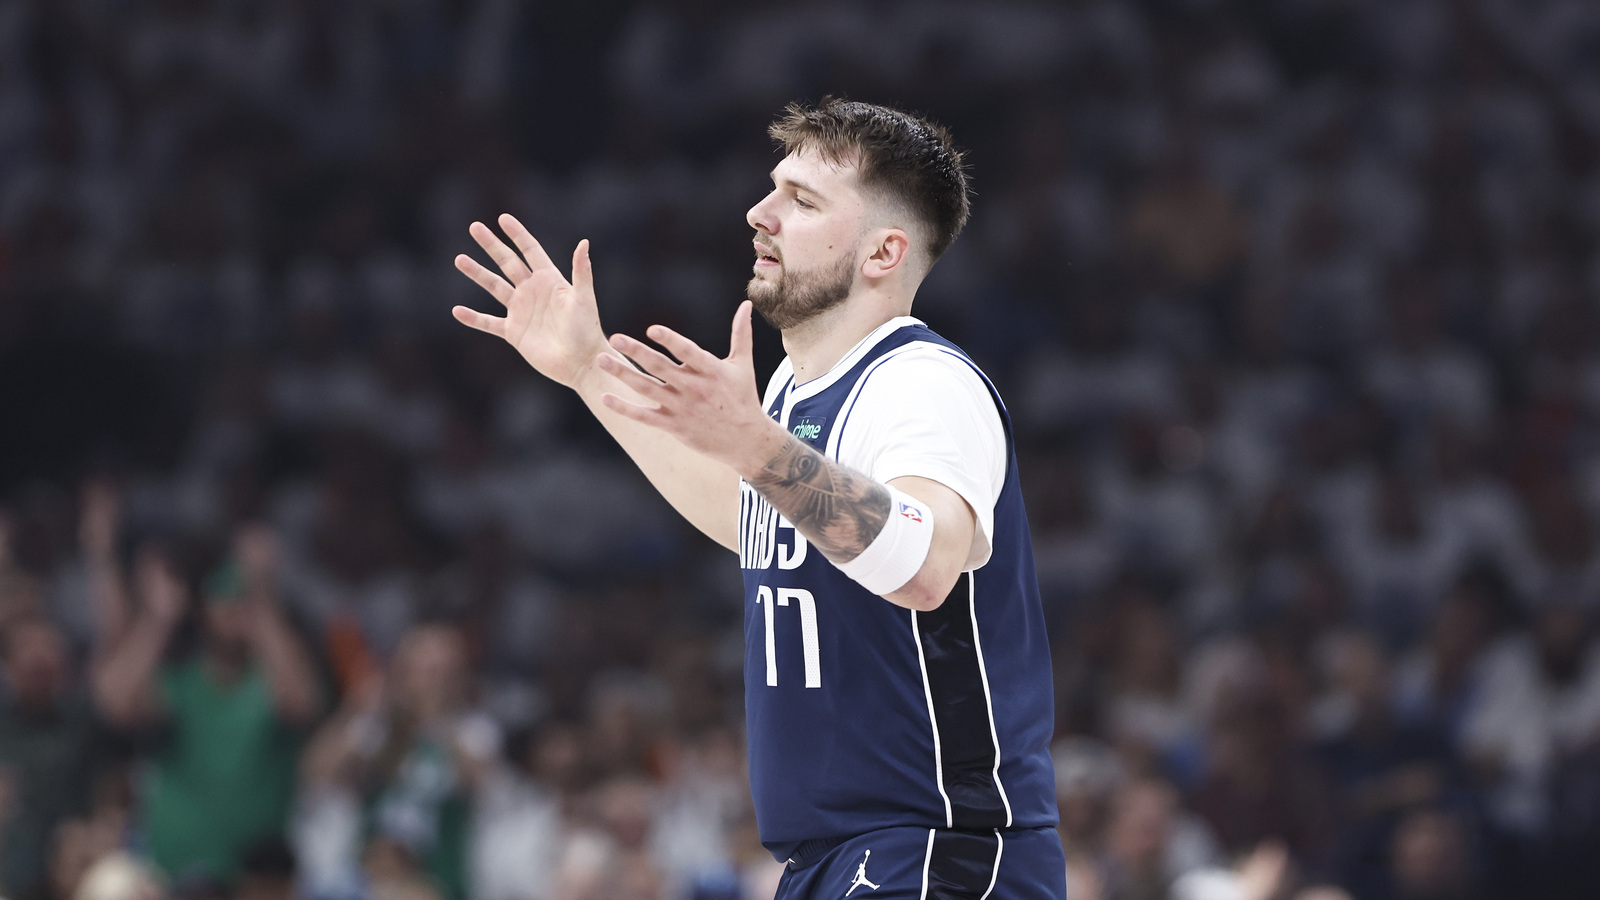 Watch: Luka Doncic stares as courtside OKC fan bizarrely throws ball away from him